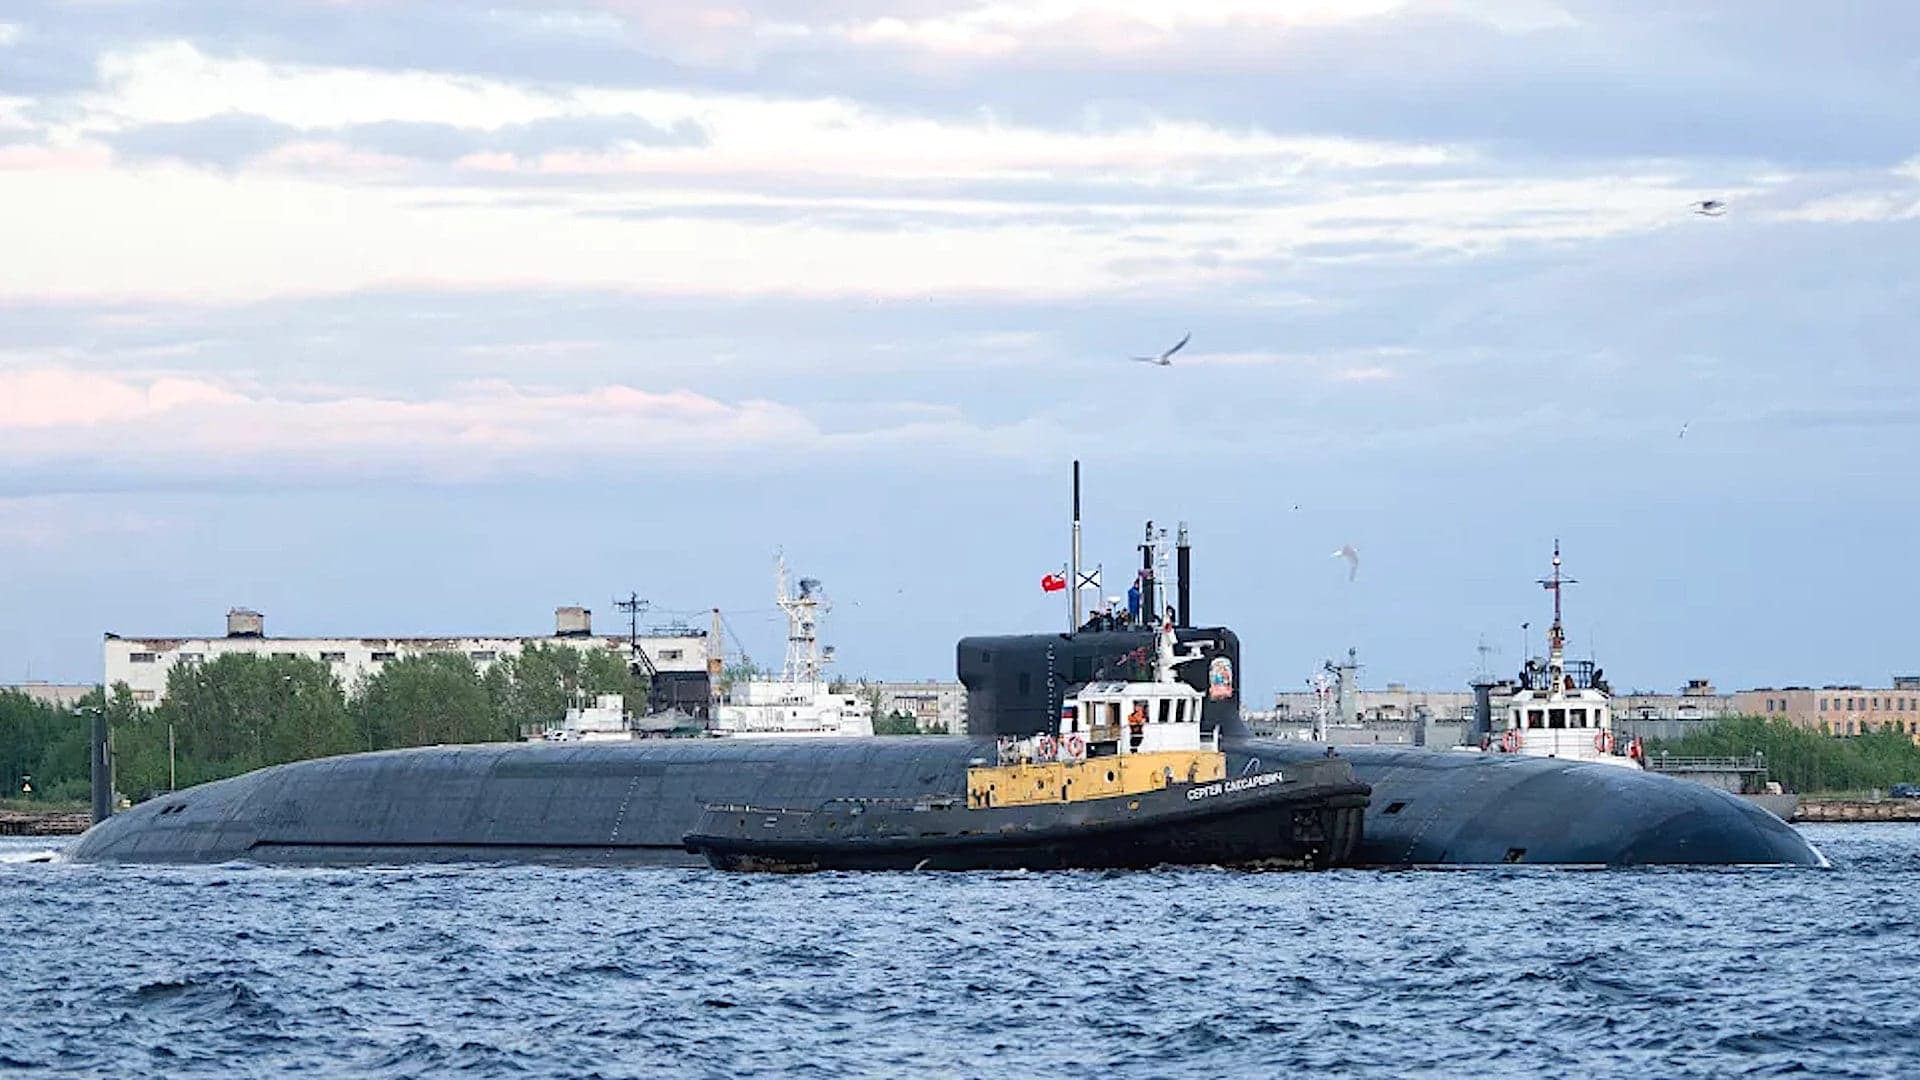 Russia’s New Super Quiet Ballistic Missile Sub In “Final” Sea Trials After Years Of Delays